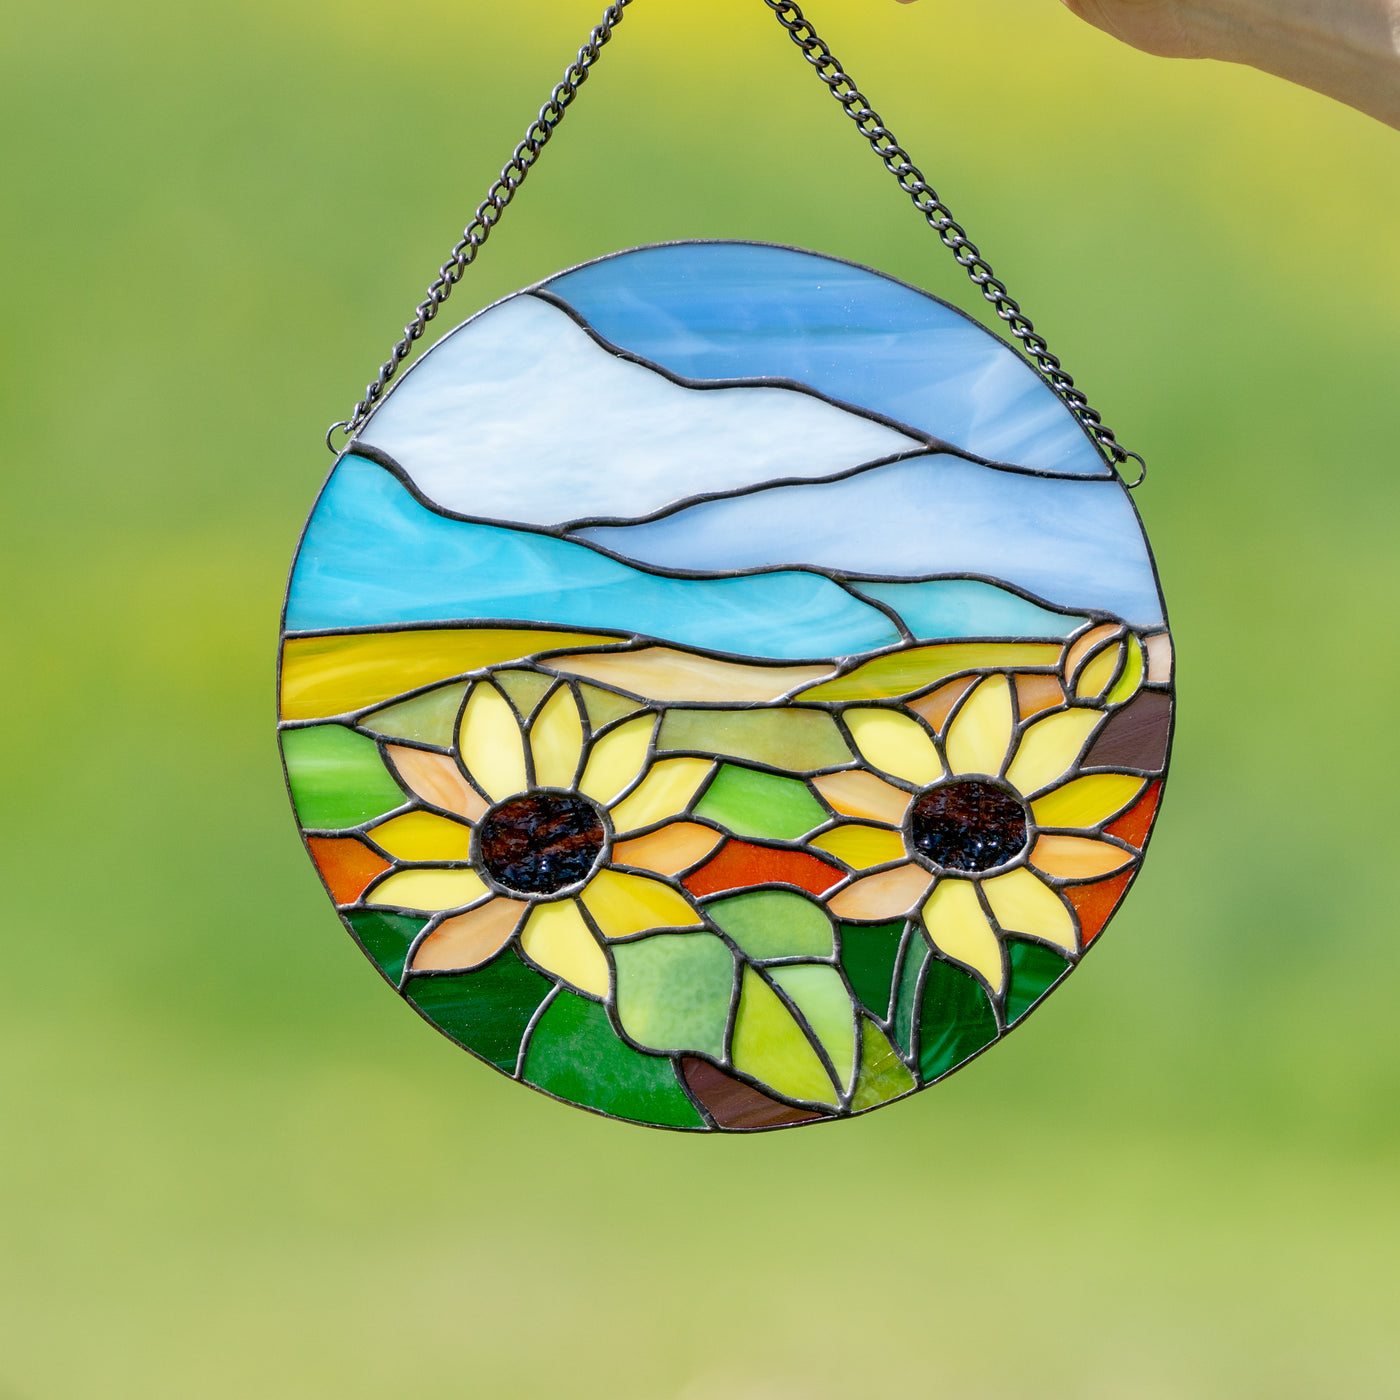 Stained glass round window panel depicting sunflowers and blue skies